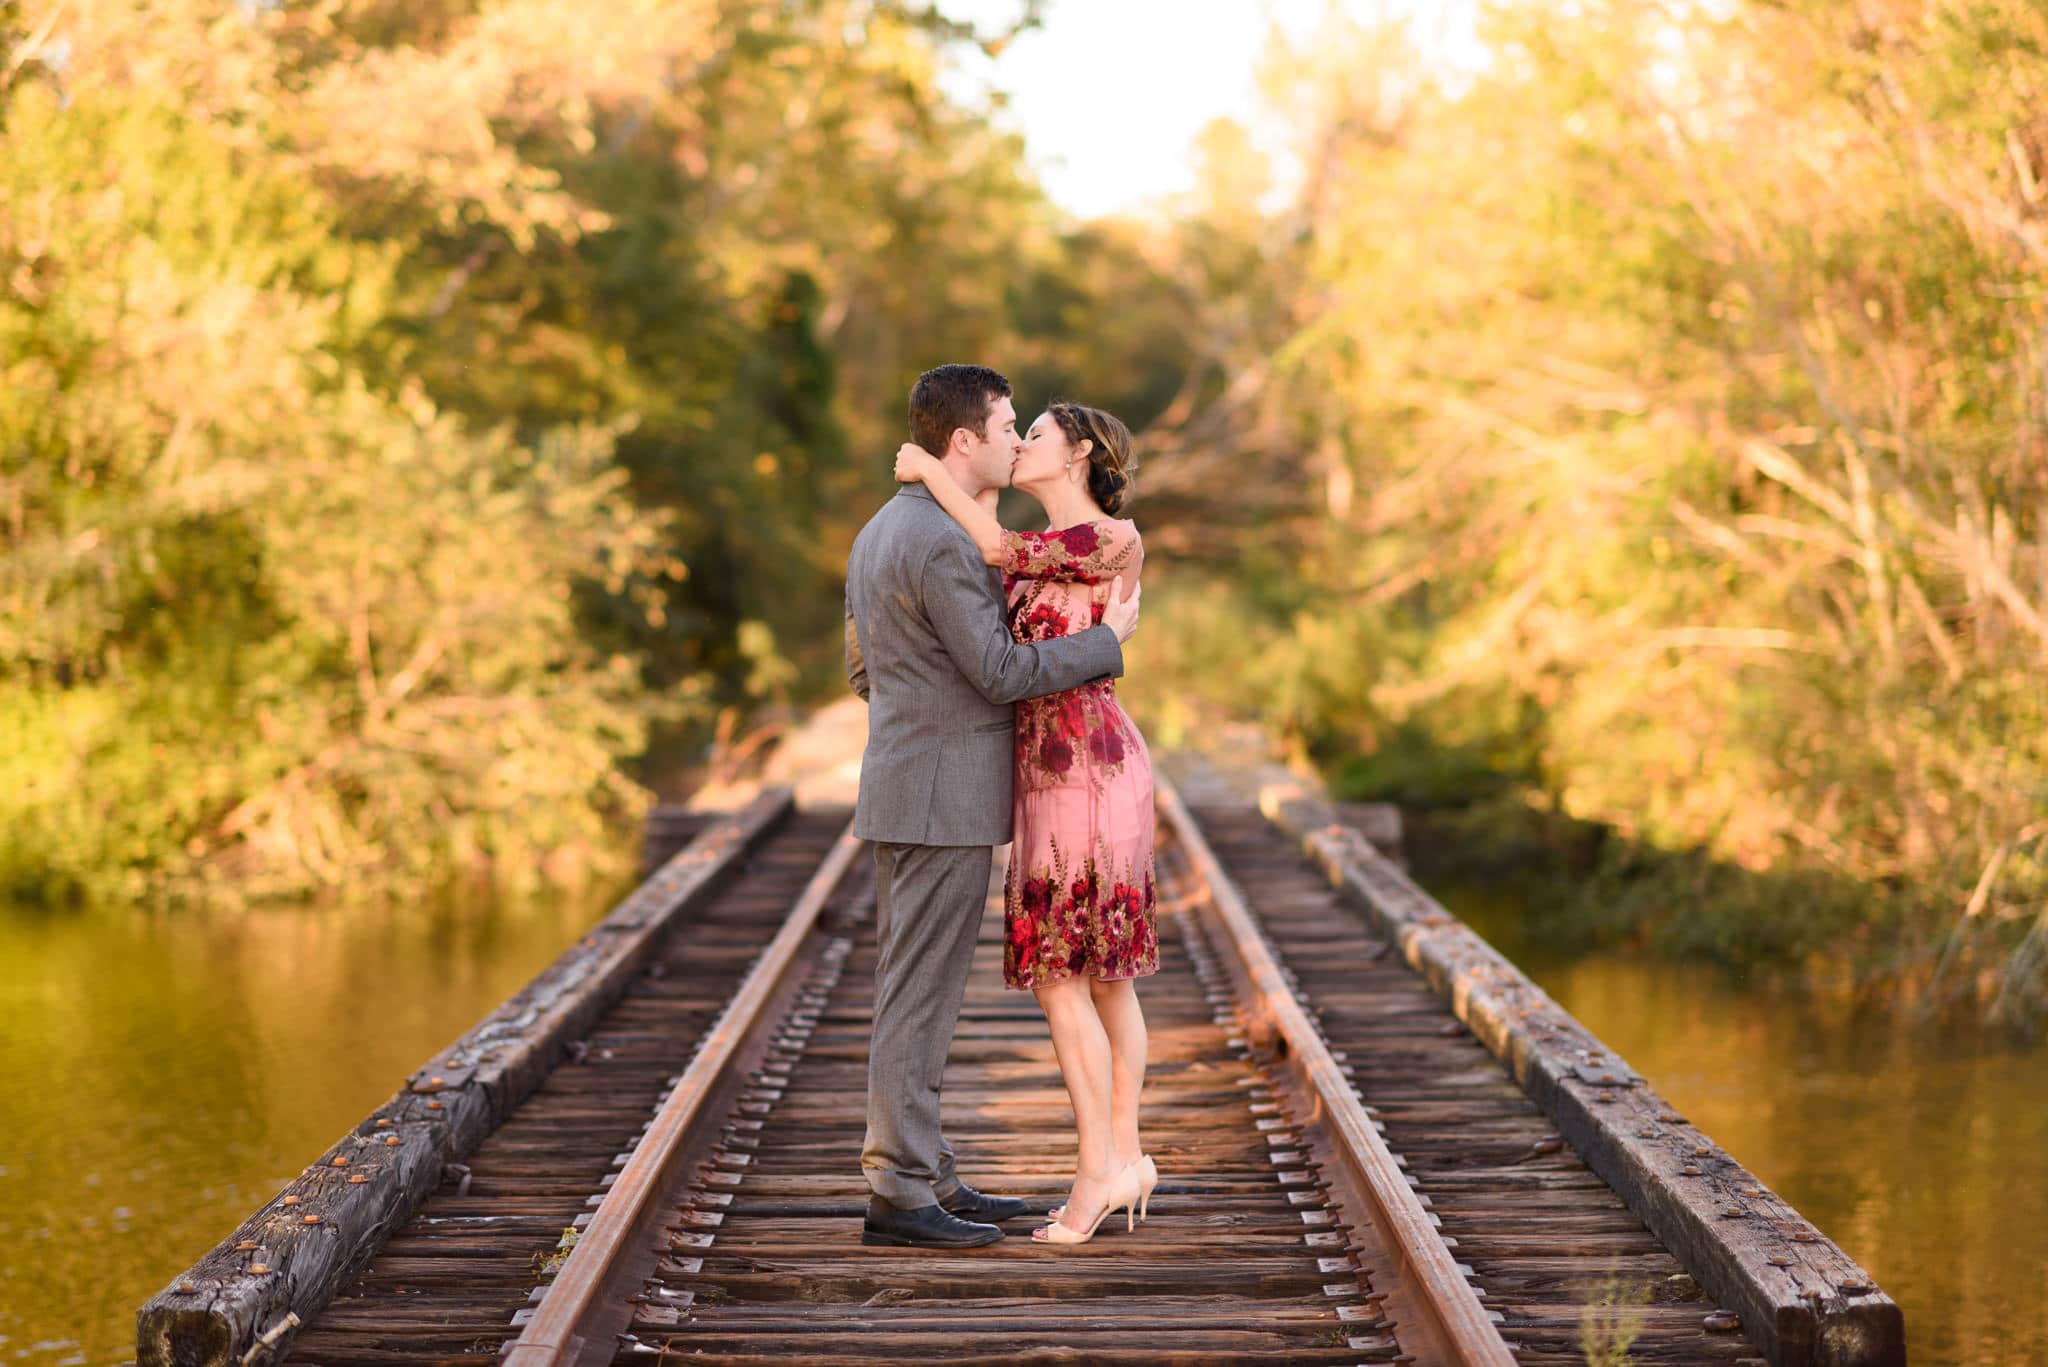 Kissing on the train tracks - Conway River Walk